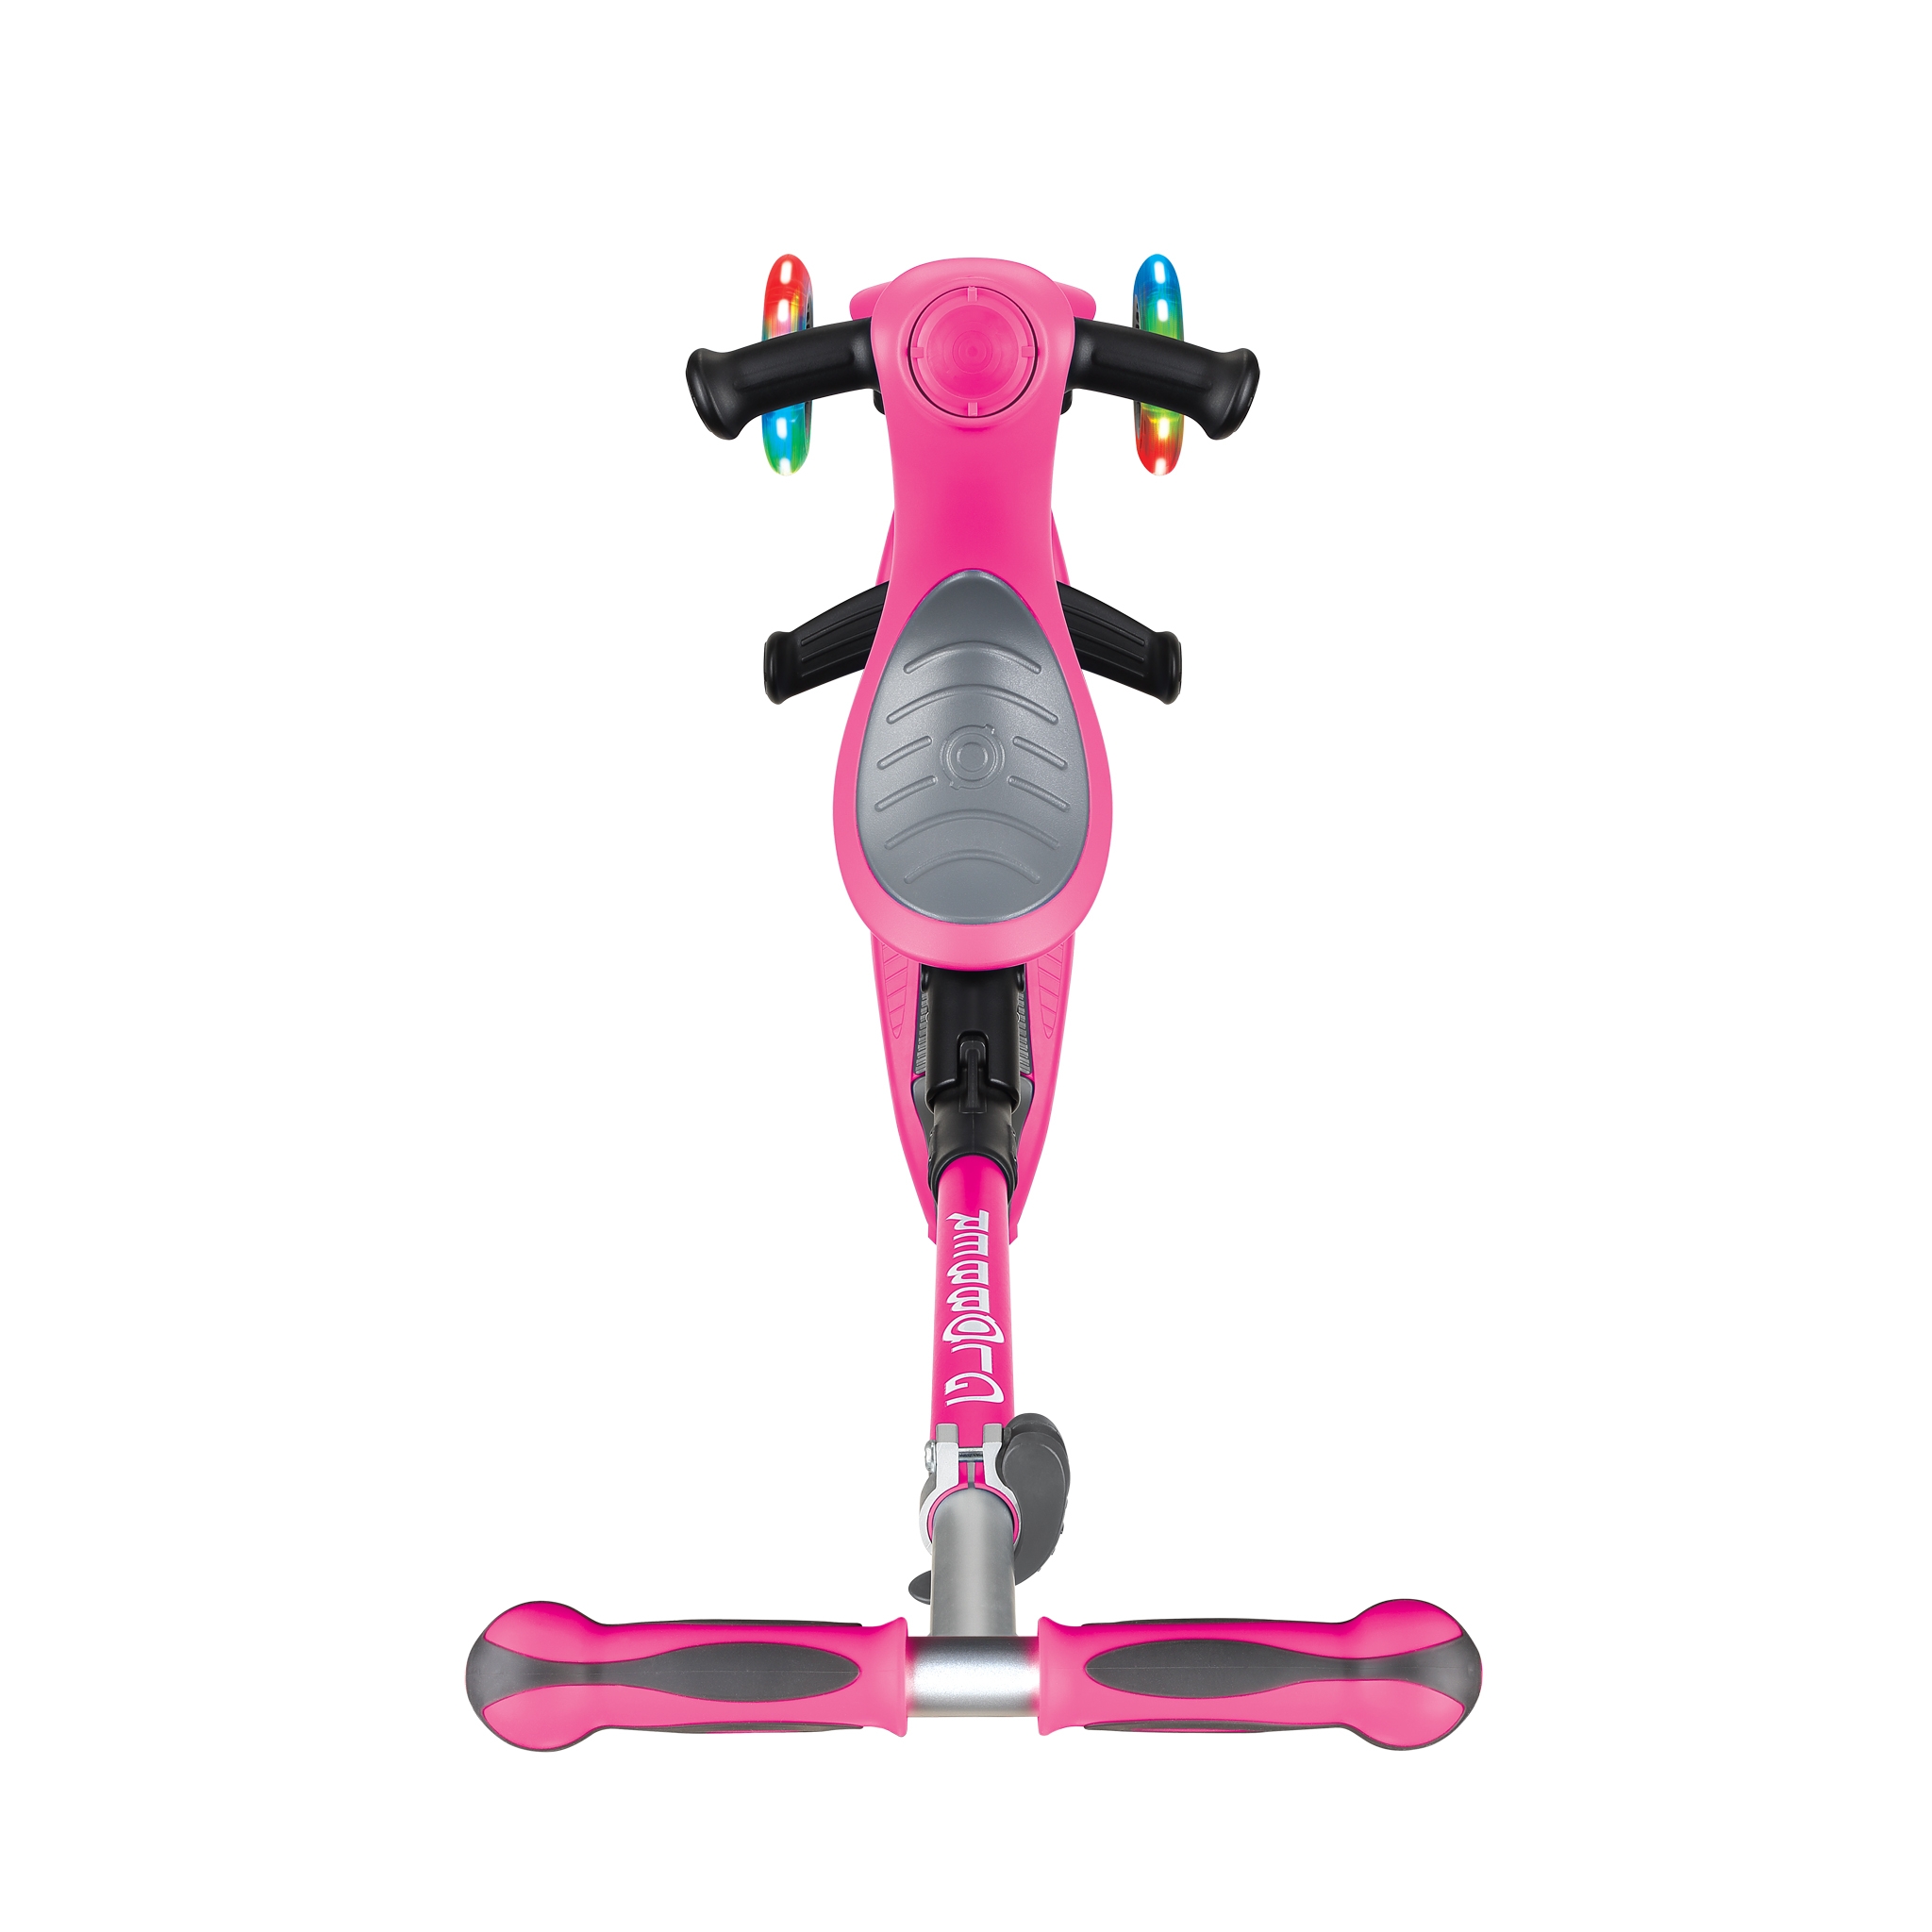 GO-UP-DELUXE-LIGHTS-ride-on-walking-bike-scooter-with-light-up-wheels-and-extra-wide-3-height-adjustable-seat-deep-pink 2